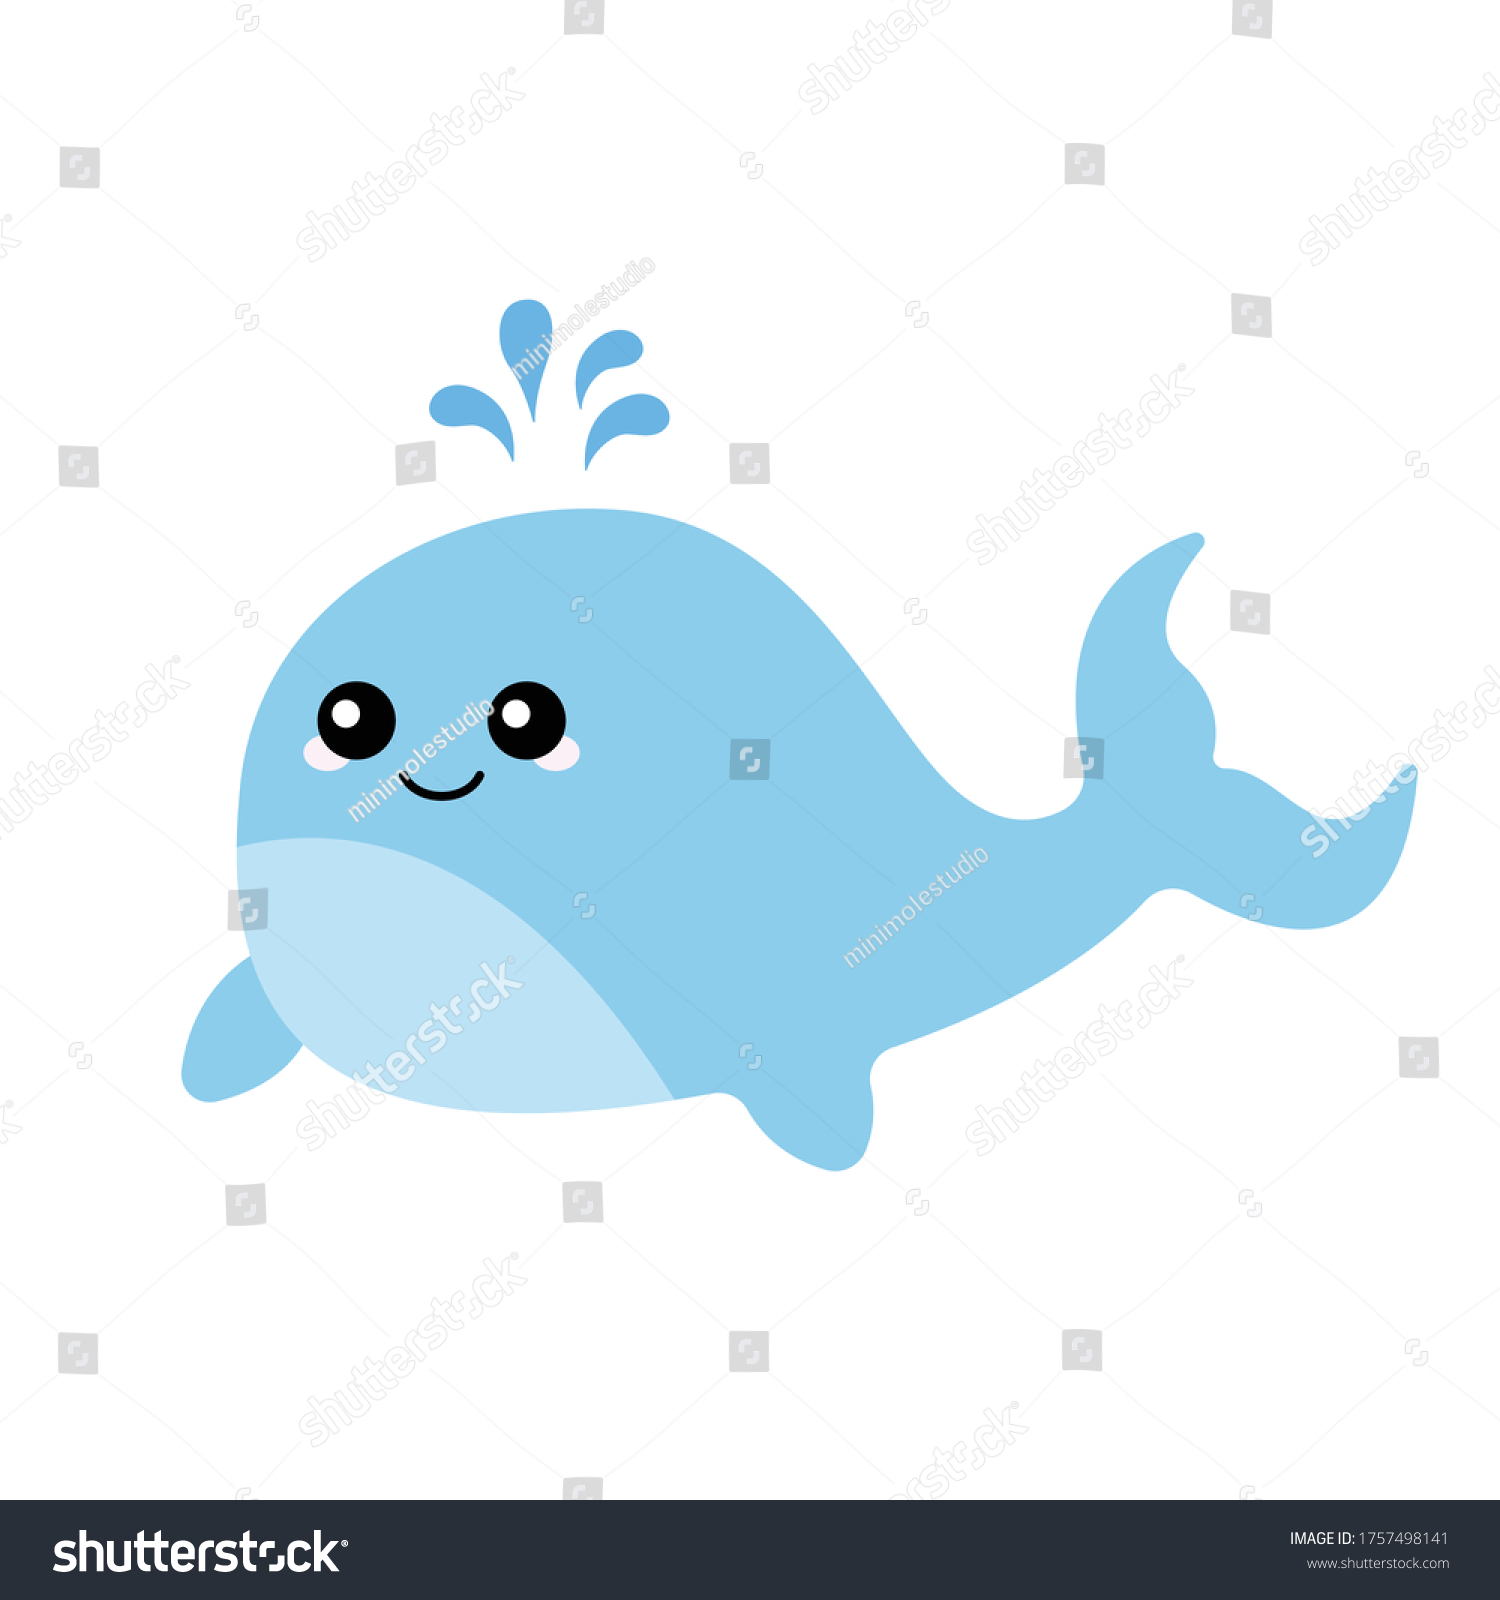 SVG of Vector illustration of a blue whale with a cute face. Simple, flat kawaii style. svg